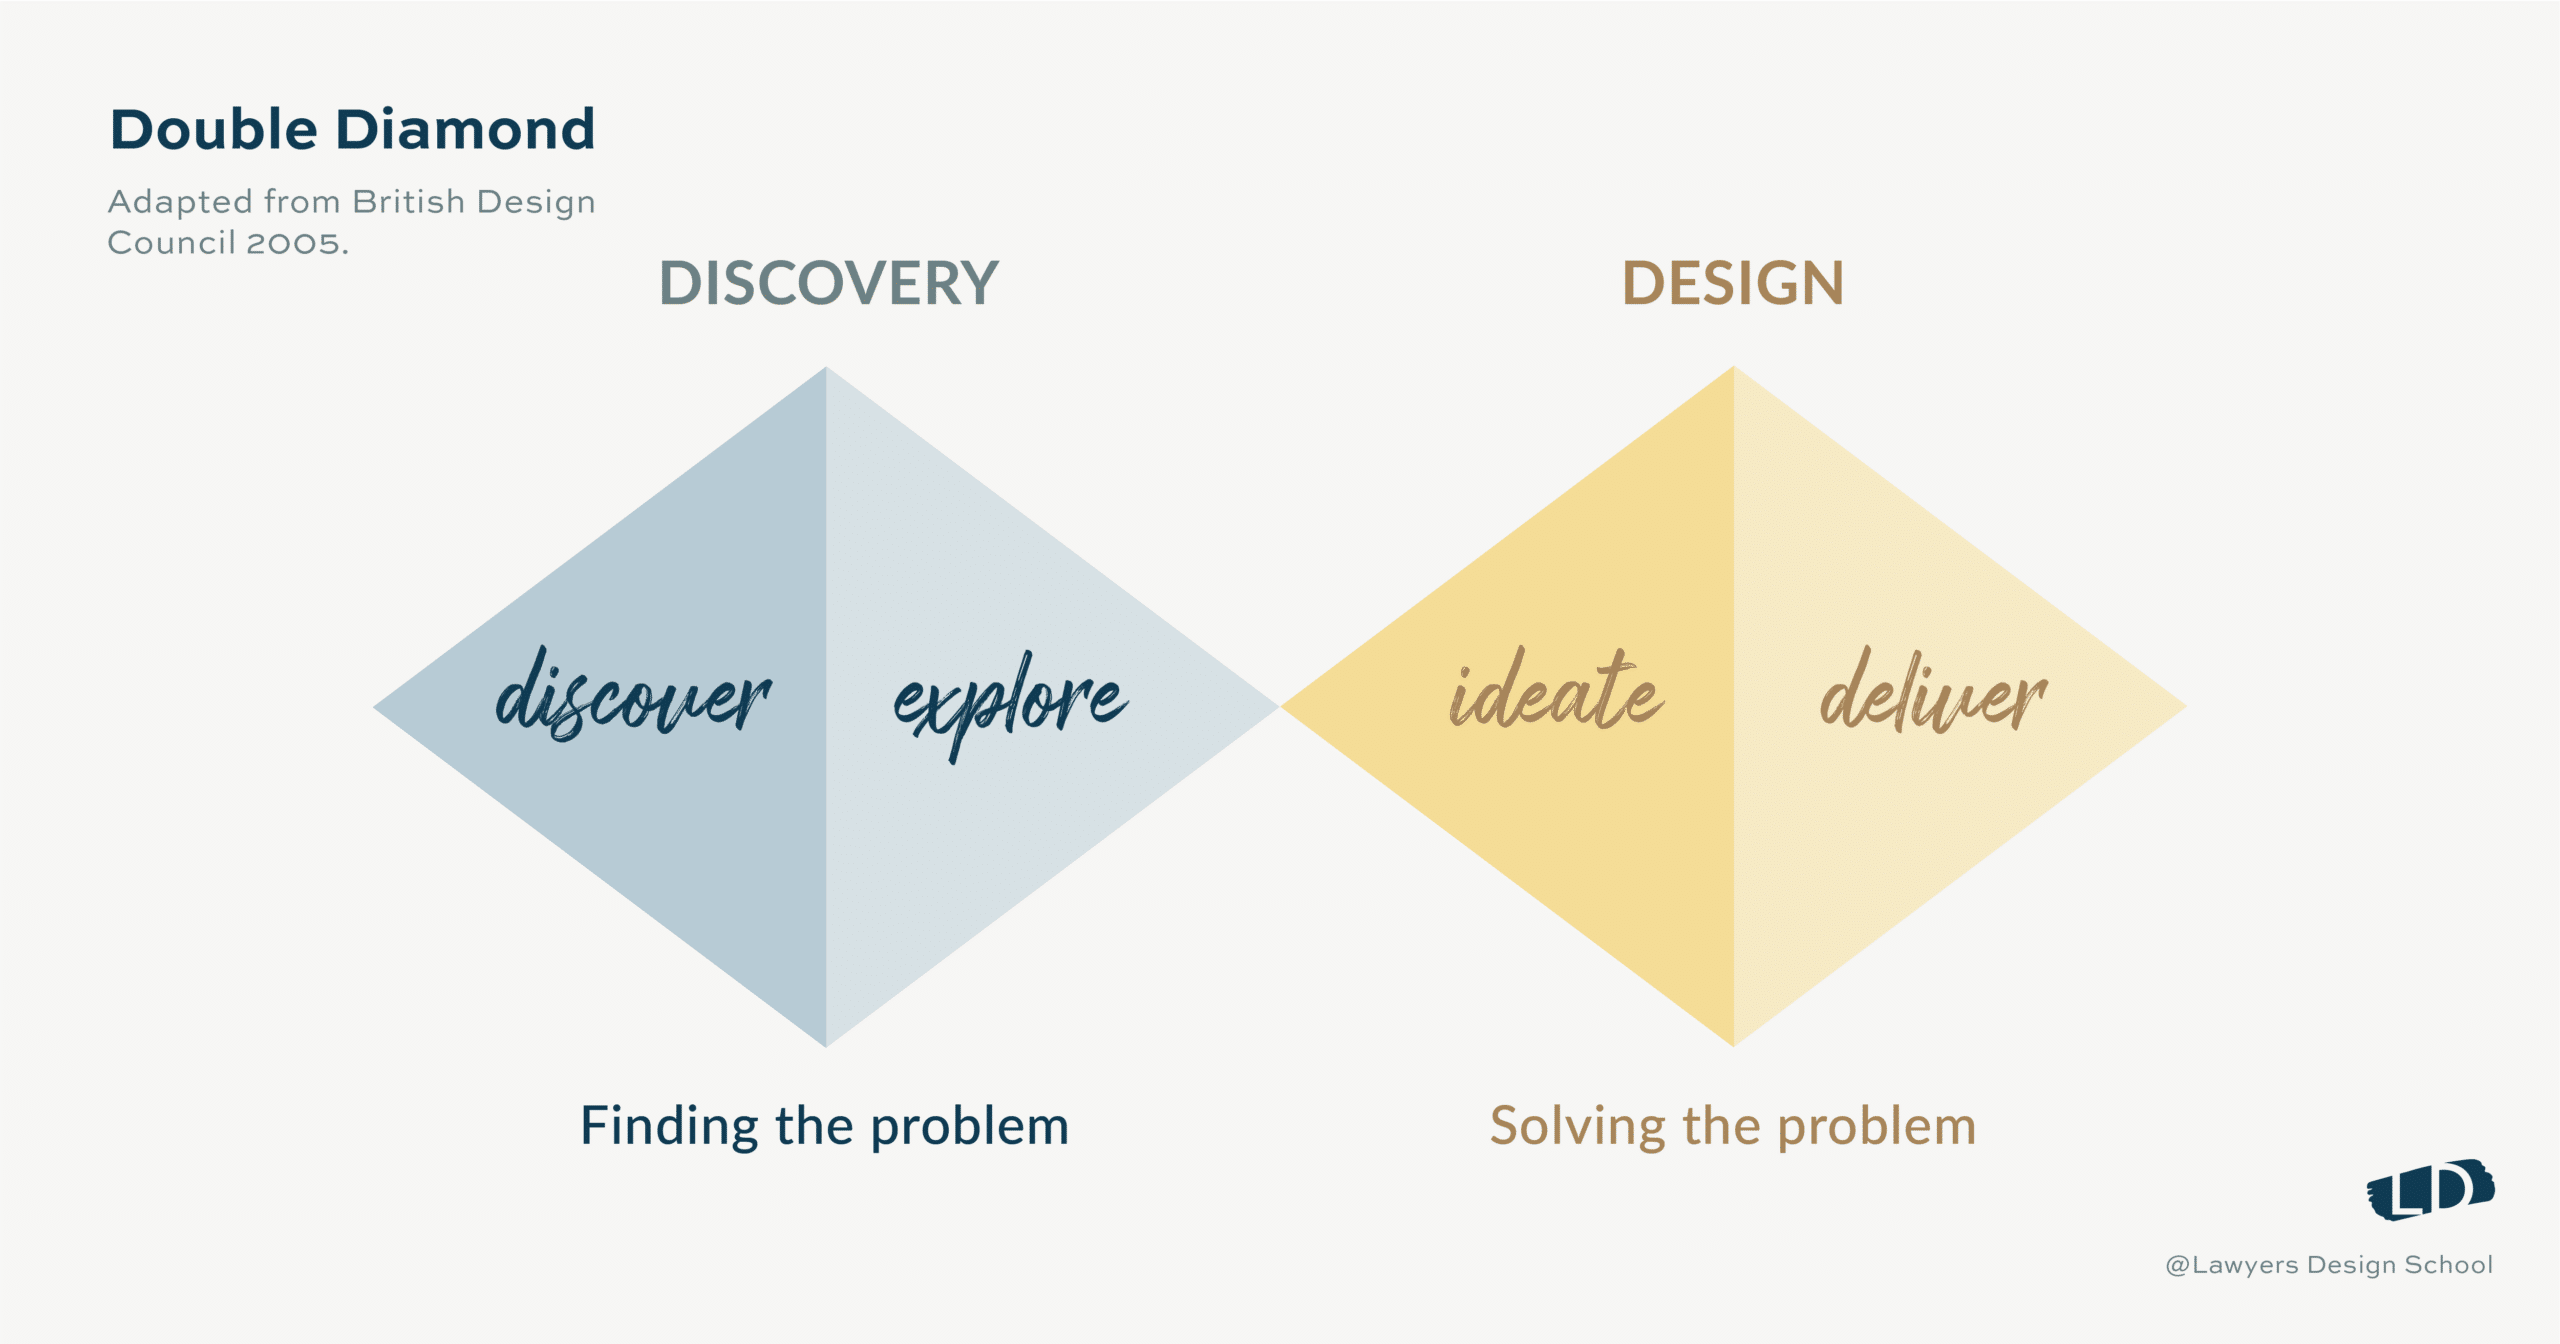 An illustration of the Double Diamond approach to starting legal design. 